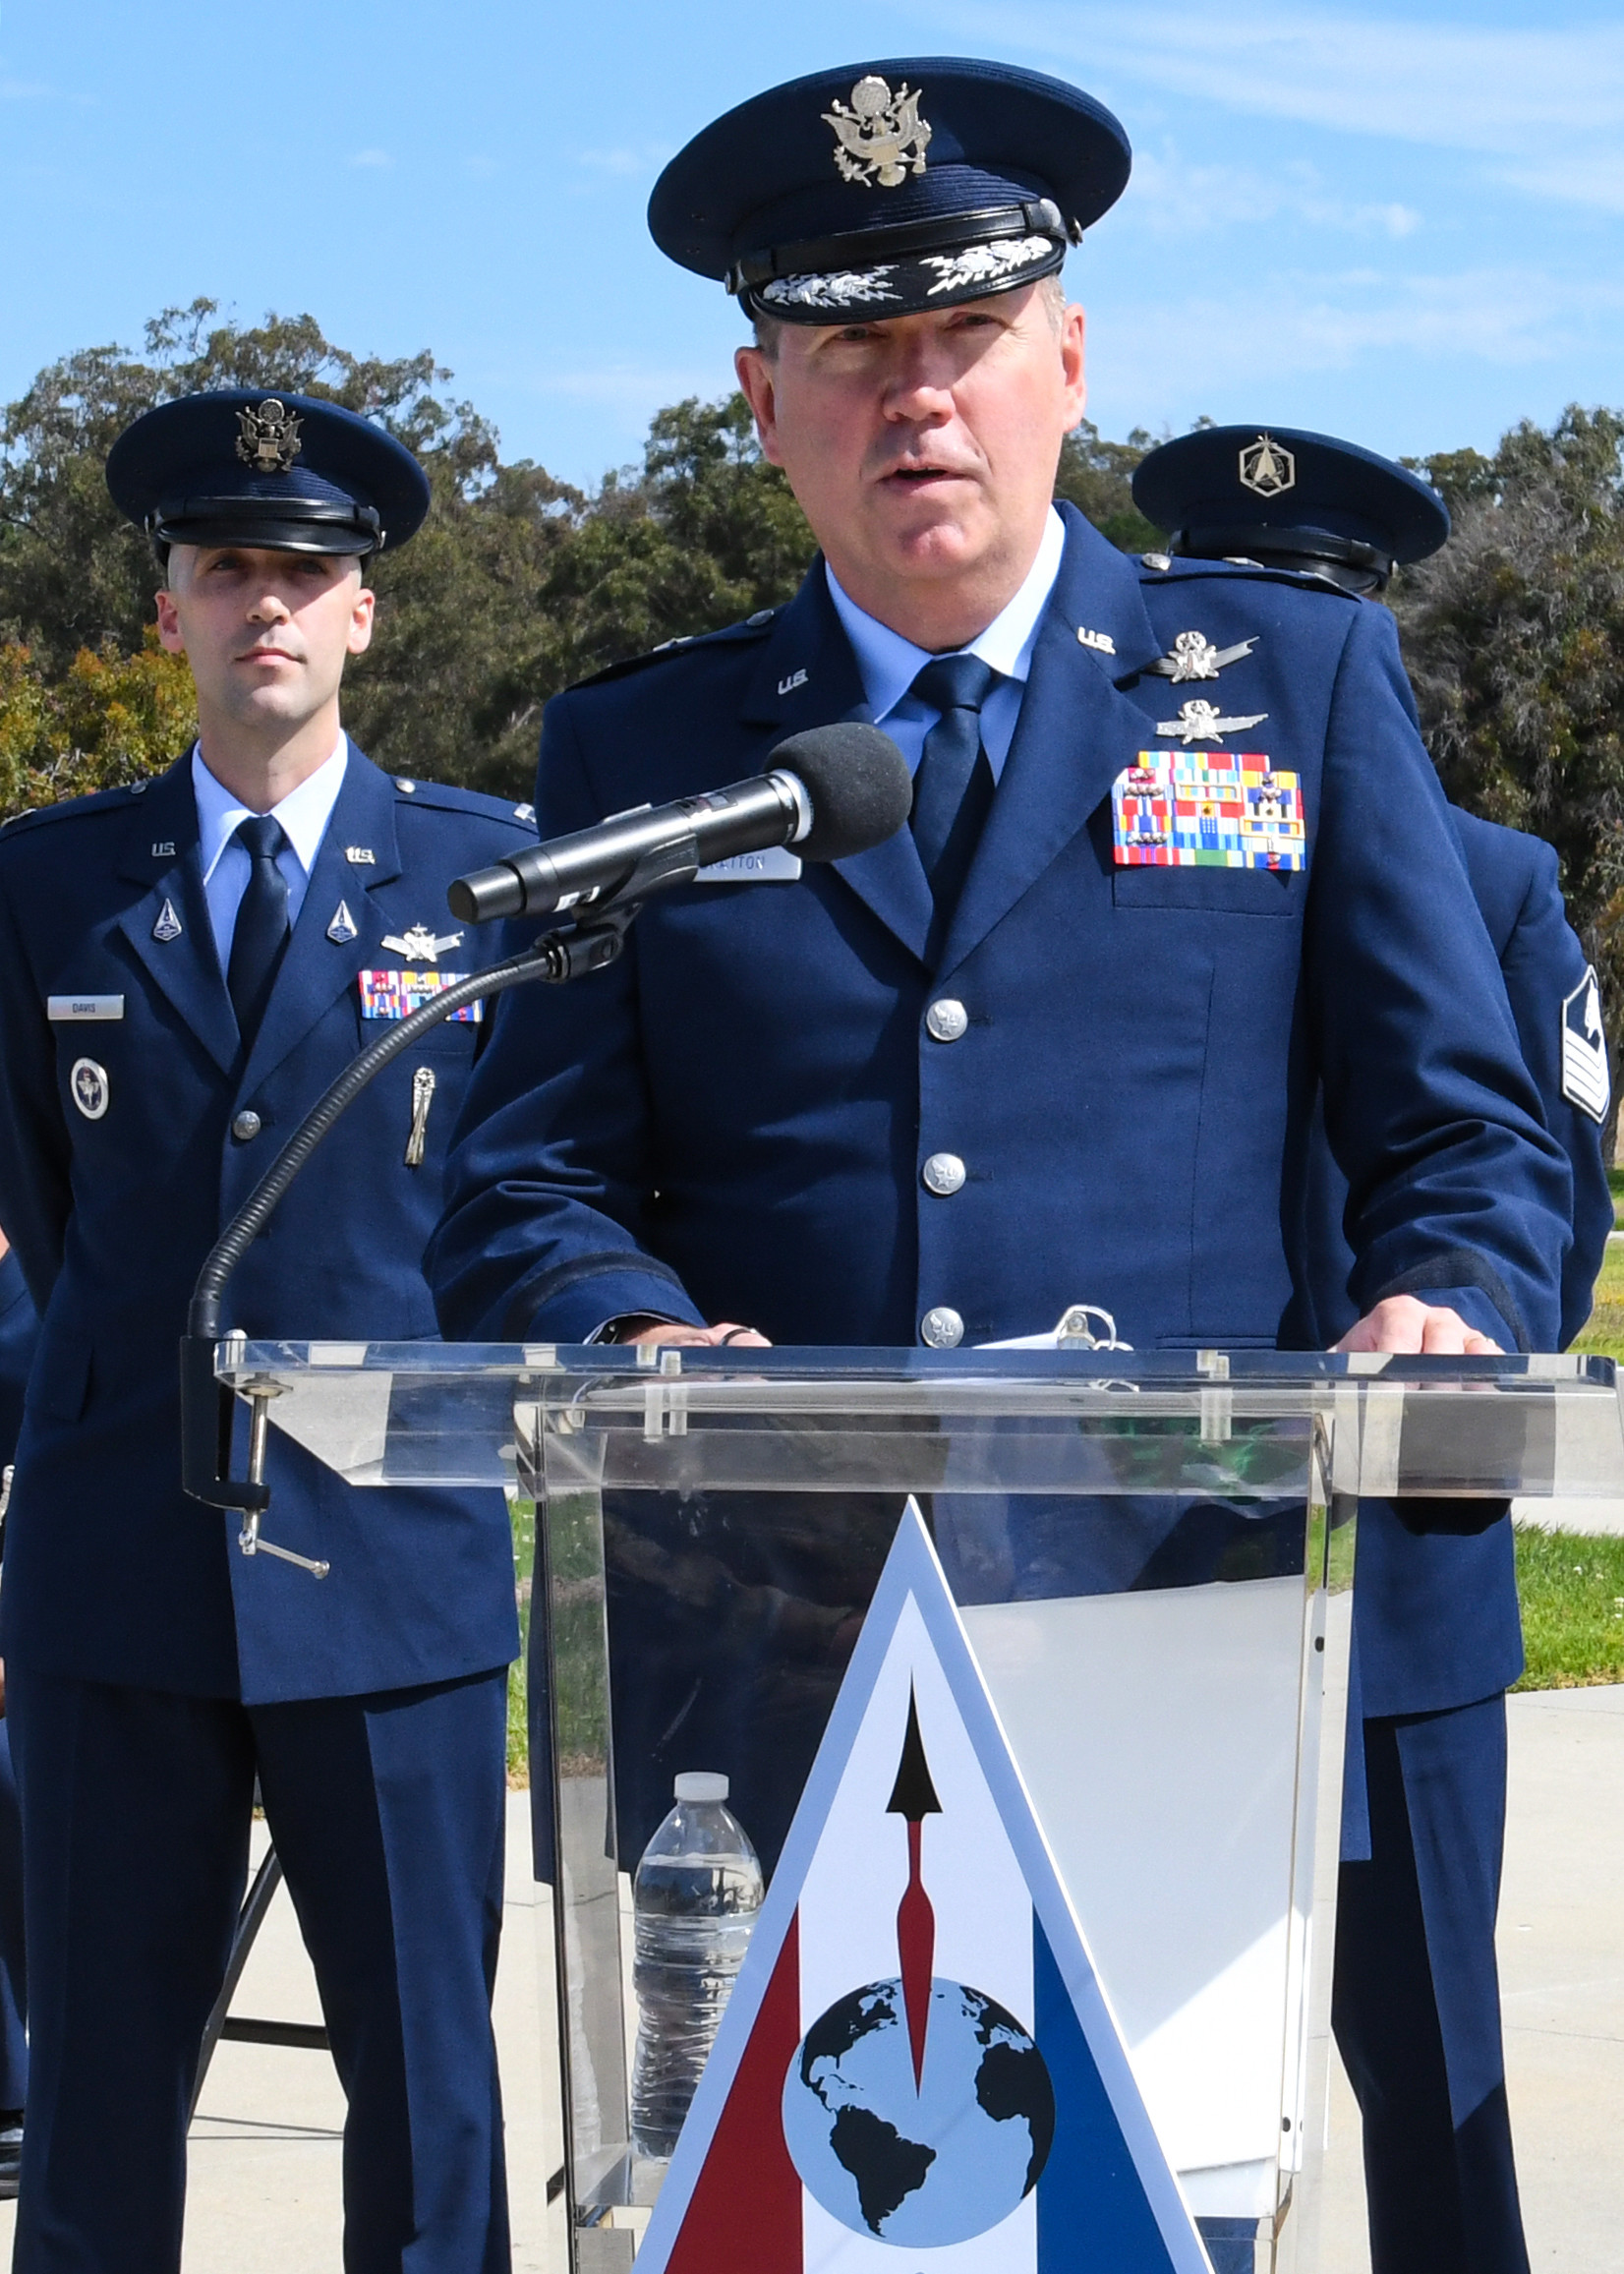 Lt. Col. Peter Norsky, commander of the 2nd Space Operations